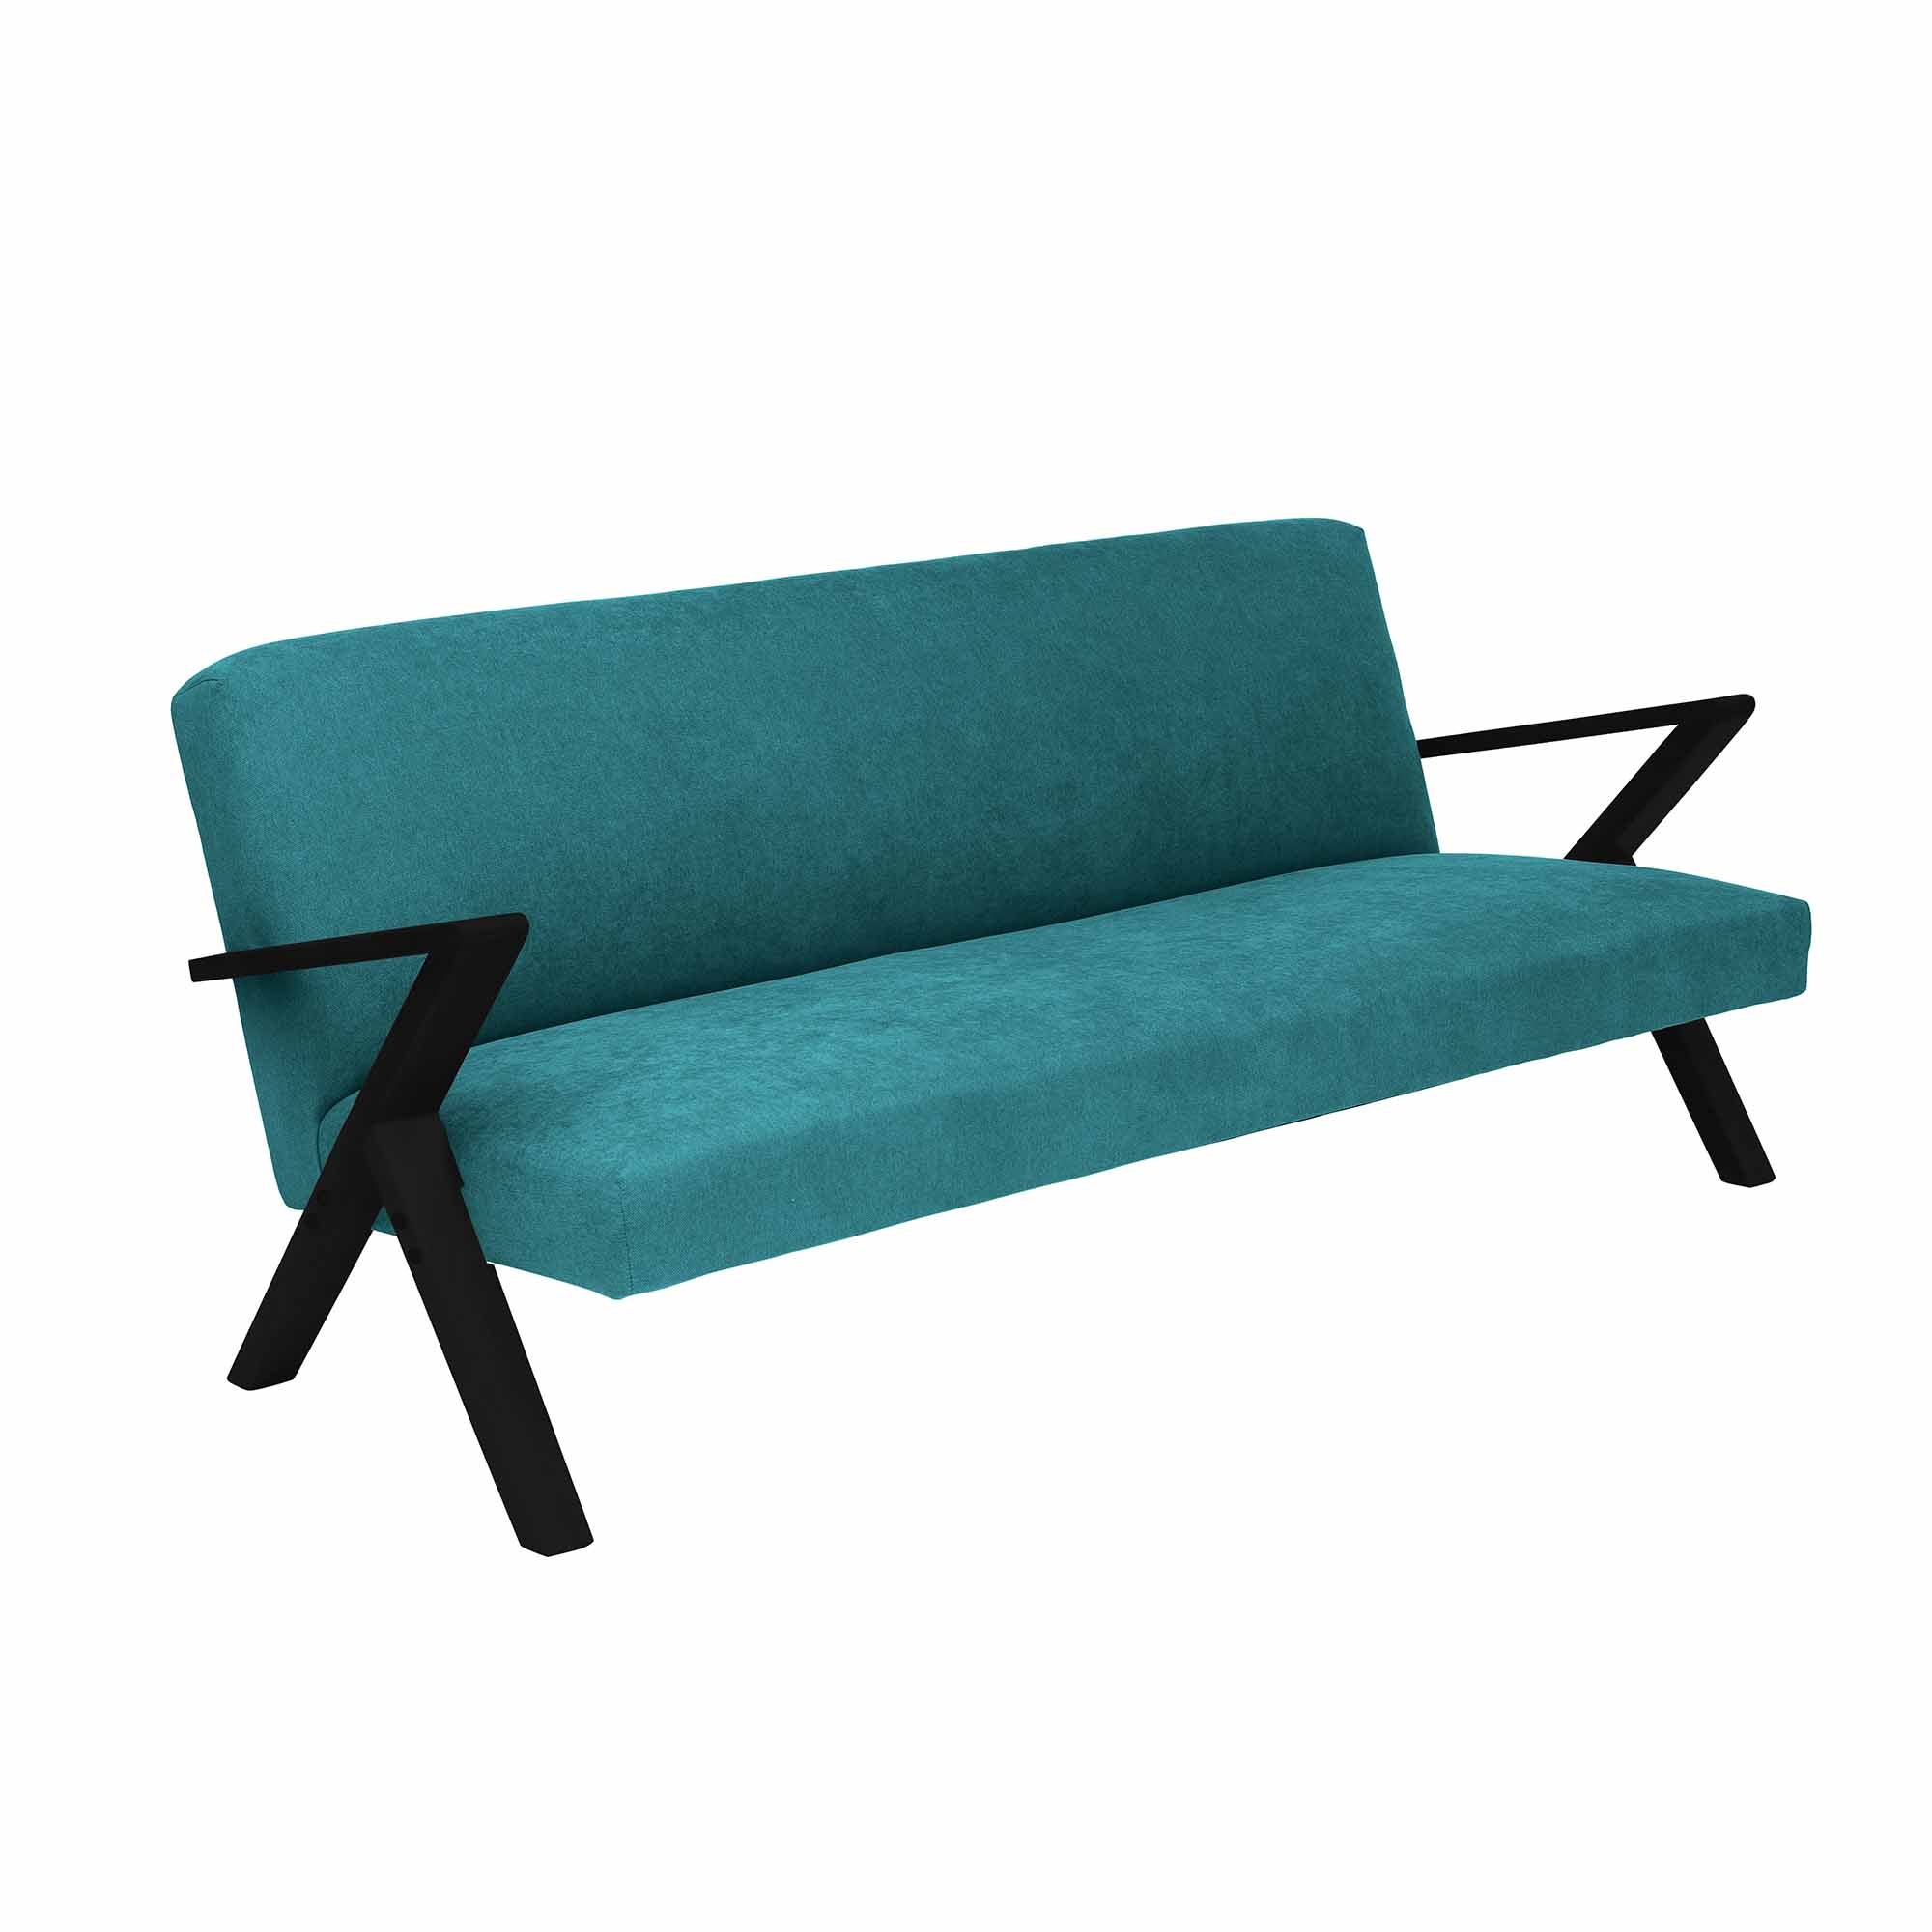  4-seater Sofa Beech Wood Frame, Black Lacquered blue fabric, half-side view